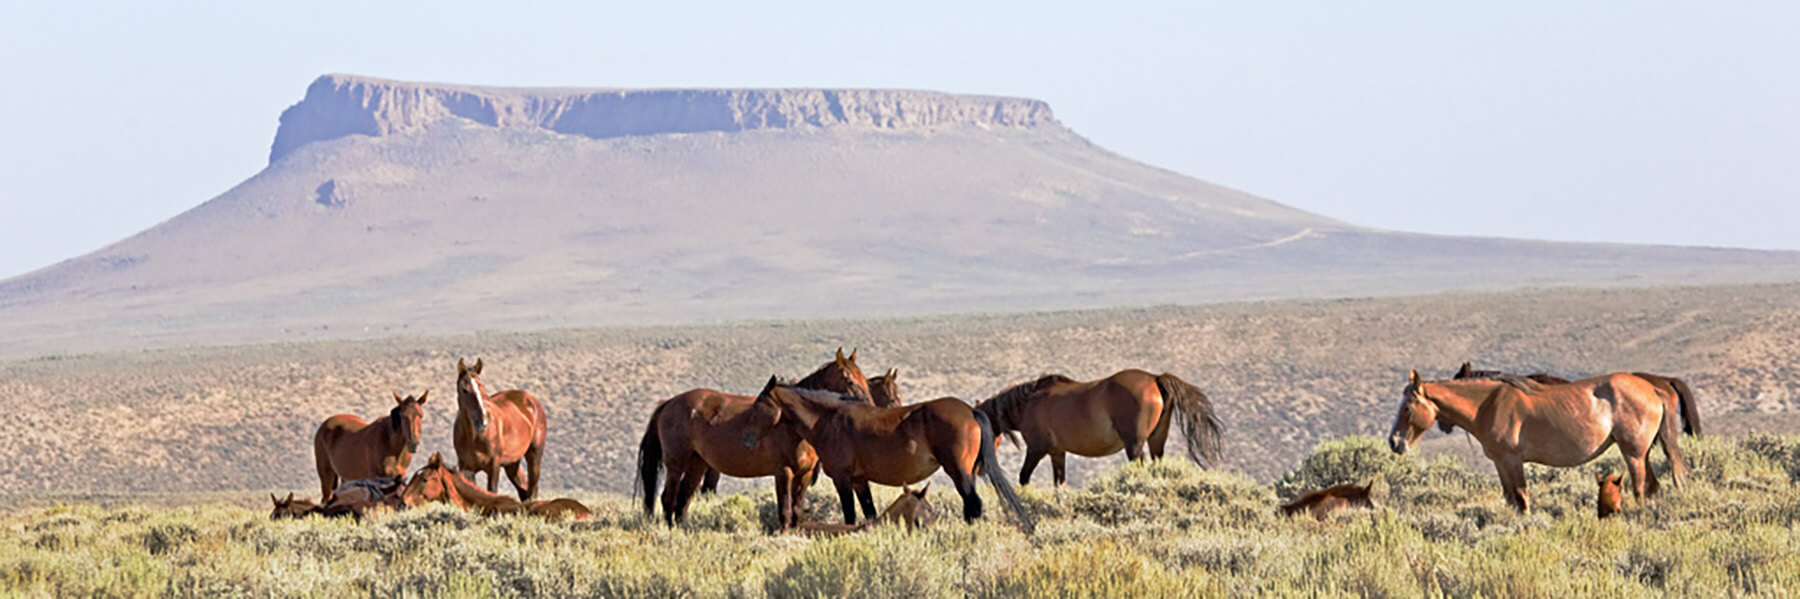 Wild horses seen in front of 飞行员孤峰 rock formation in Wyoming